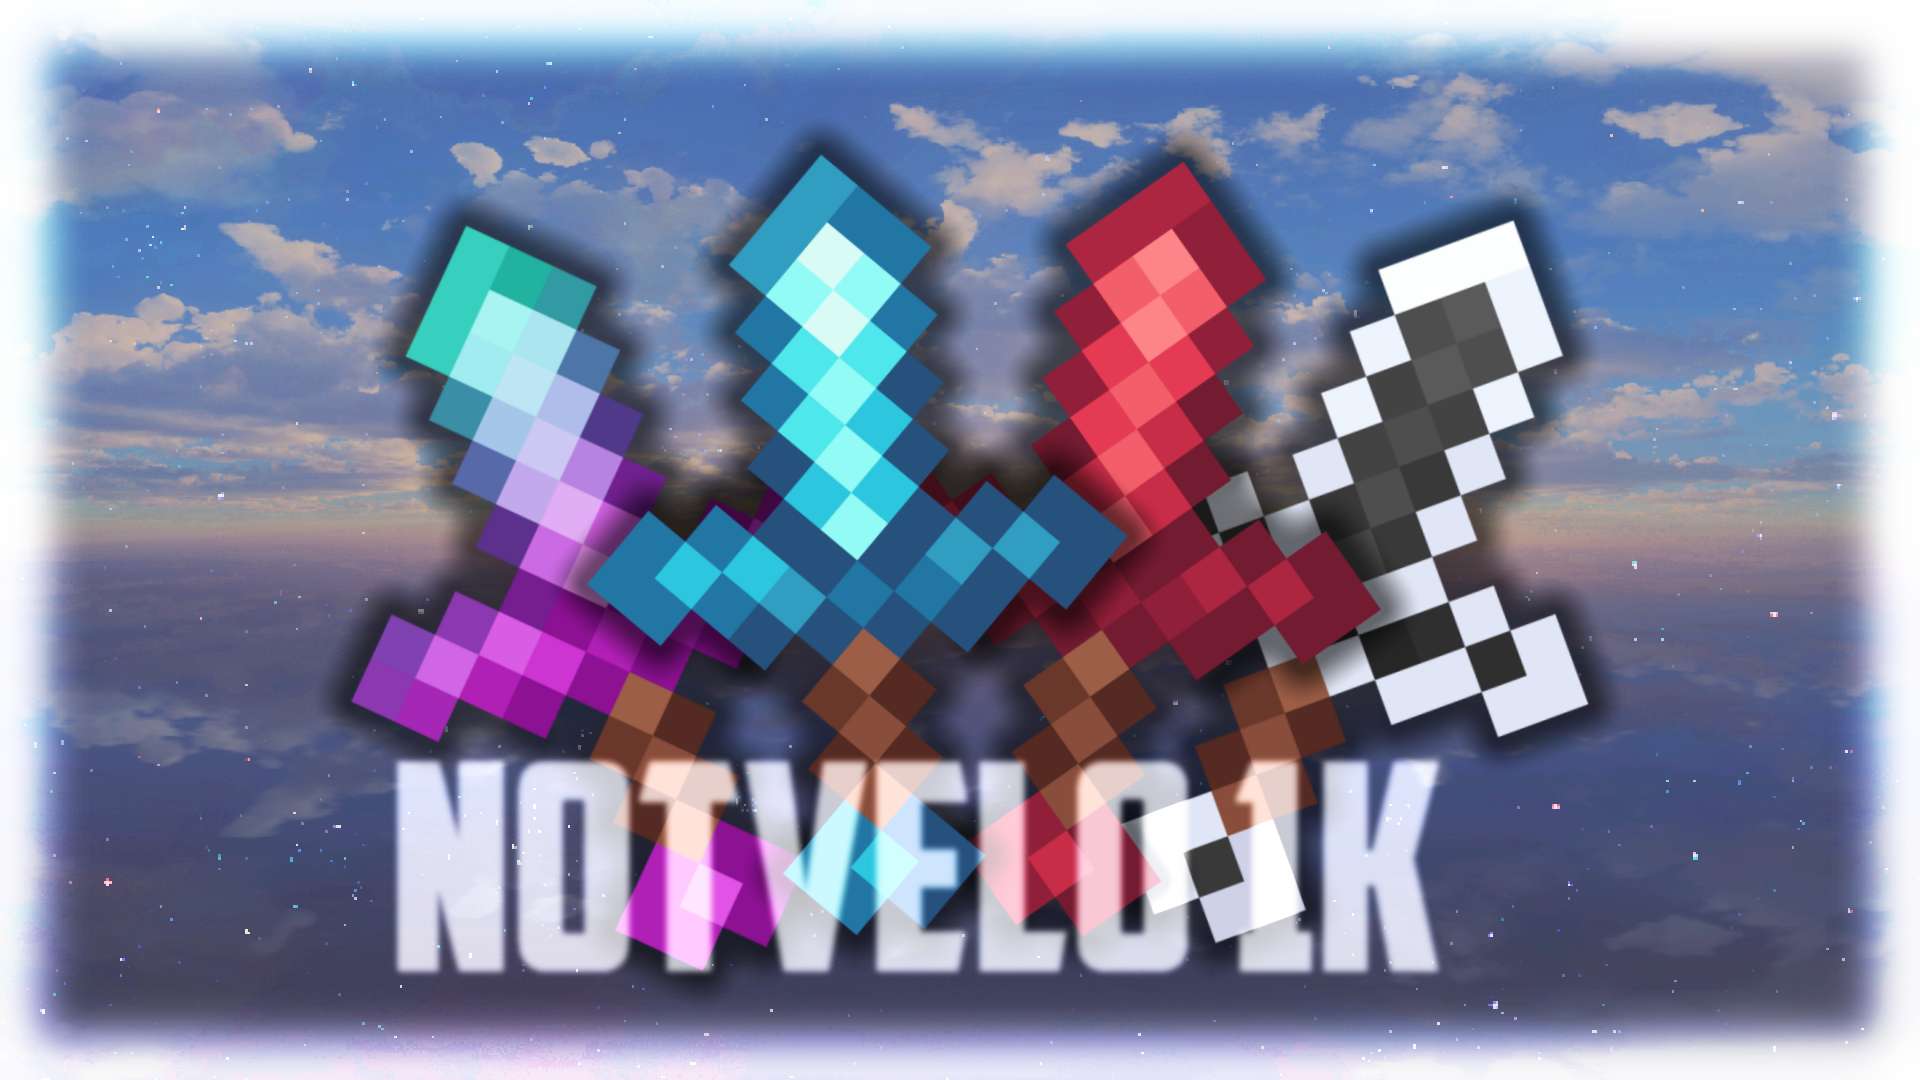 NotVelo 1k - Black and White 16 by Zlax on PvPRP